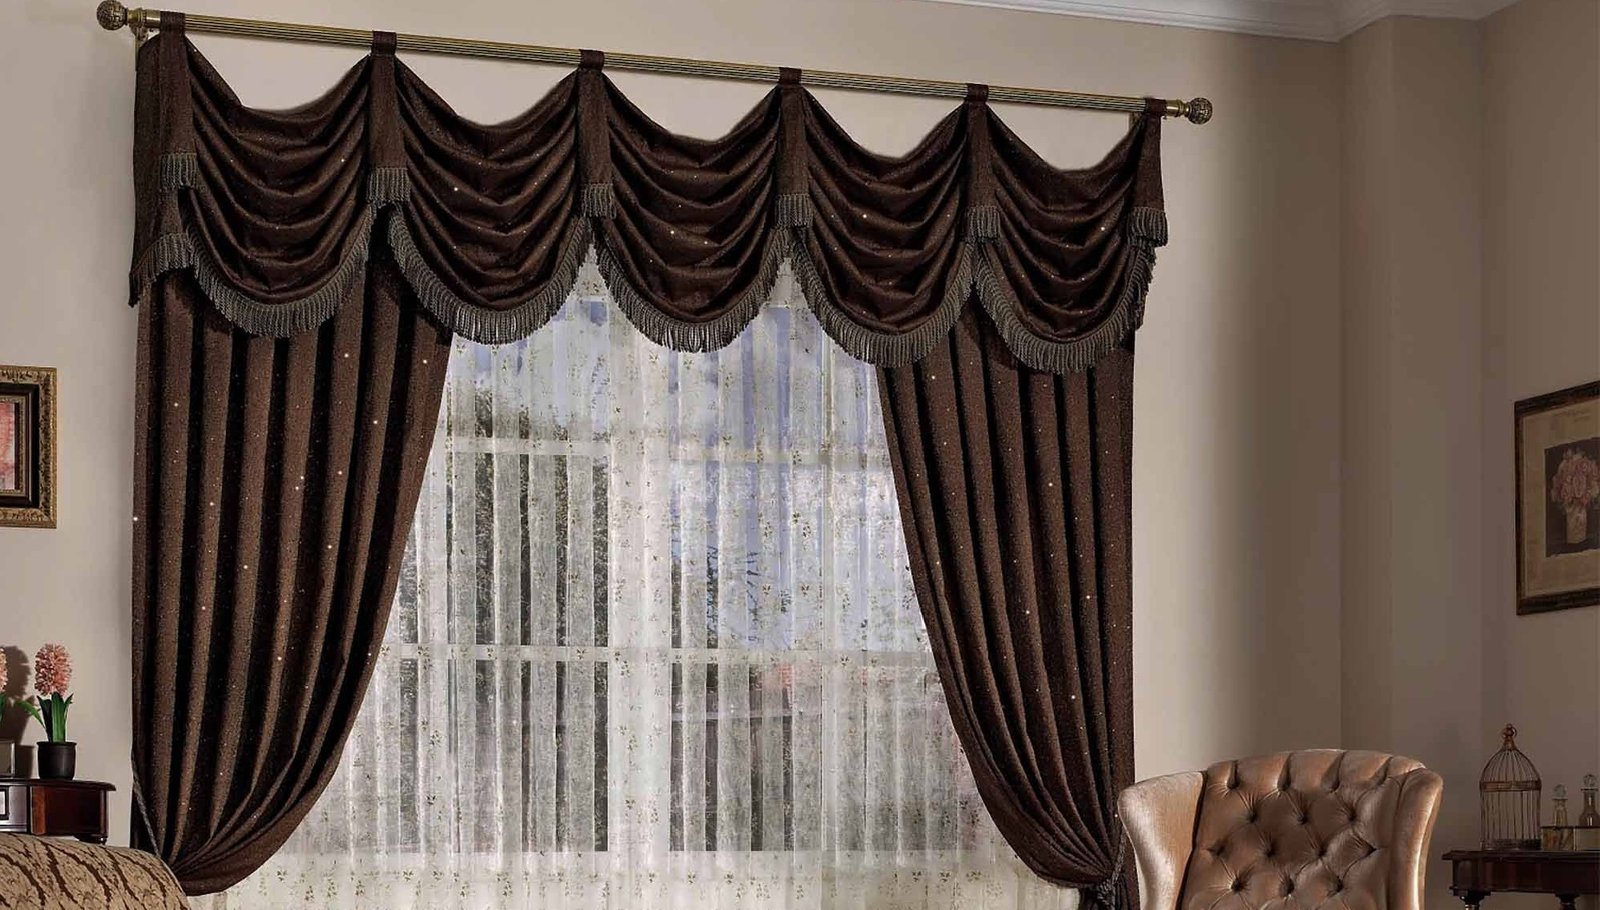 Why Is It Necessary To Have Blinds, Roman Shades, And Curtains In Your House Windows?